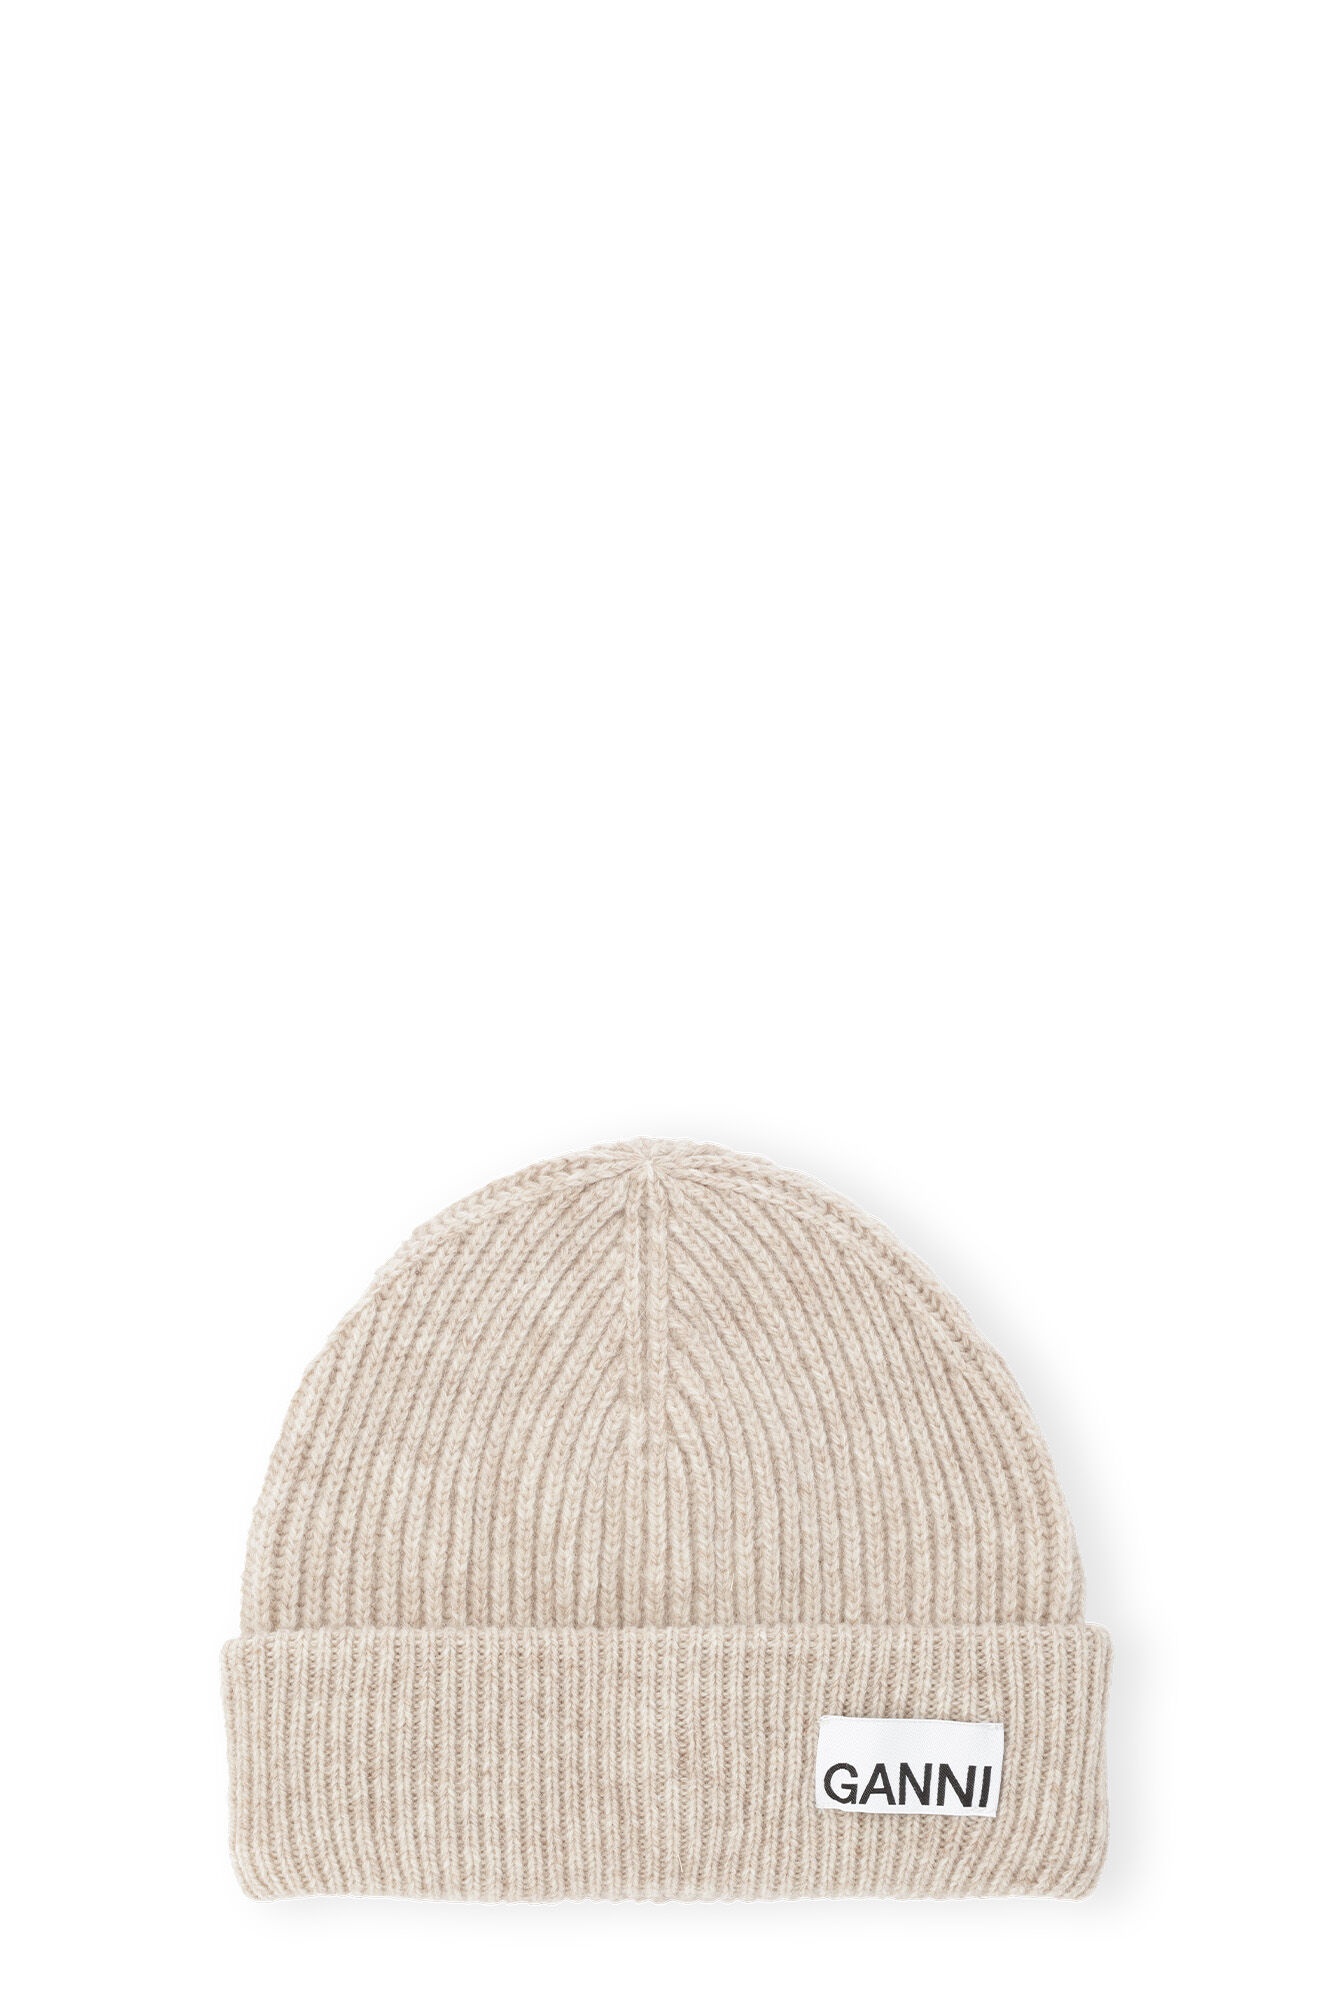 SAND FITTED WOOL RIB KNIT BEANIE - 1